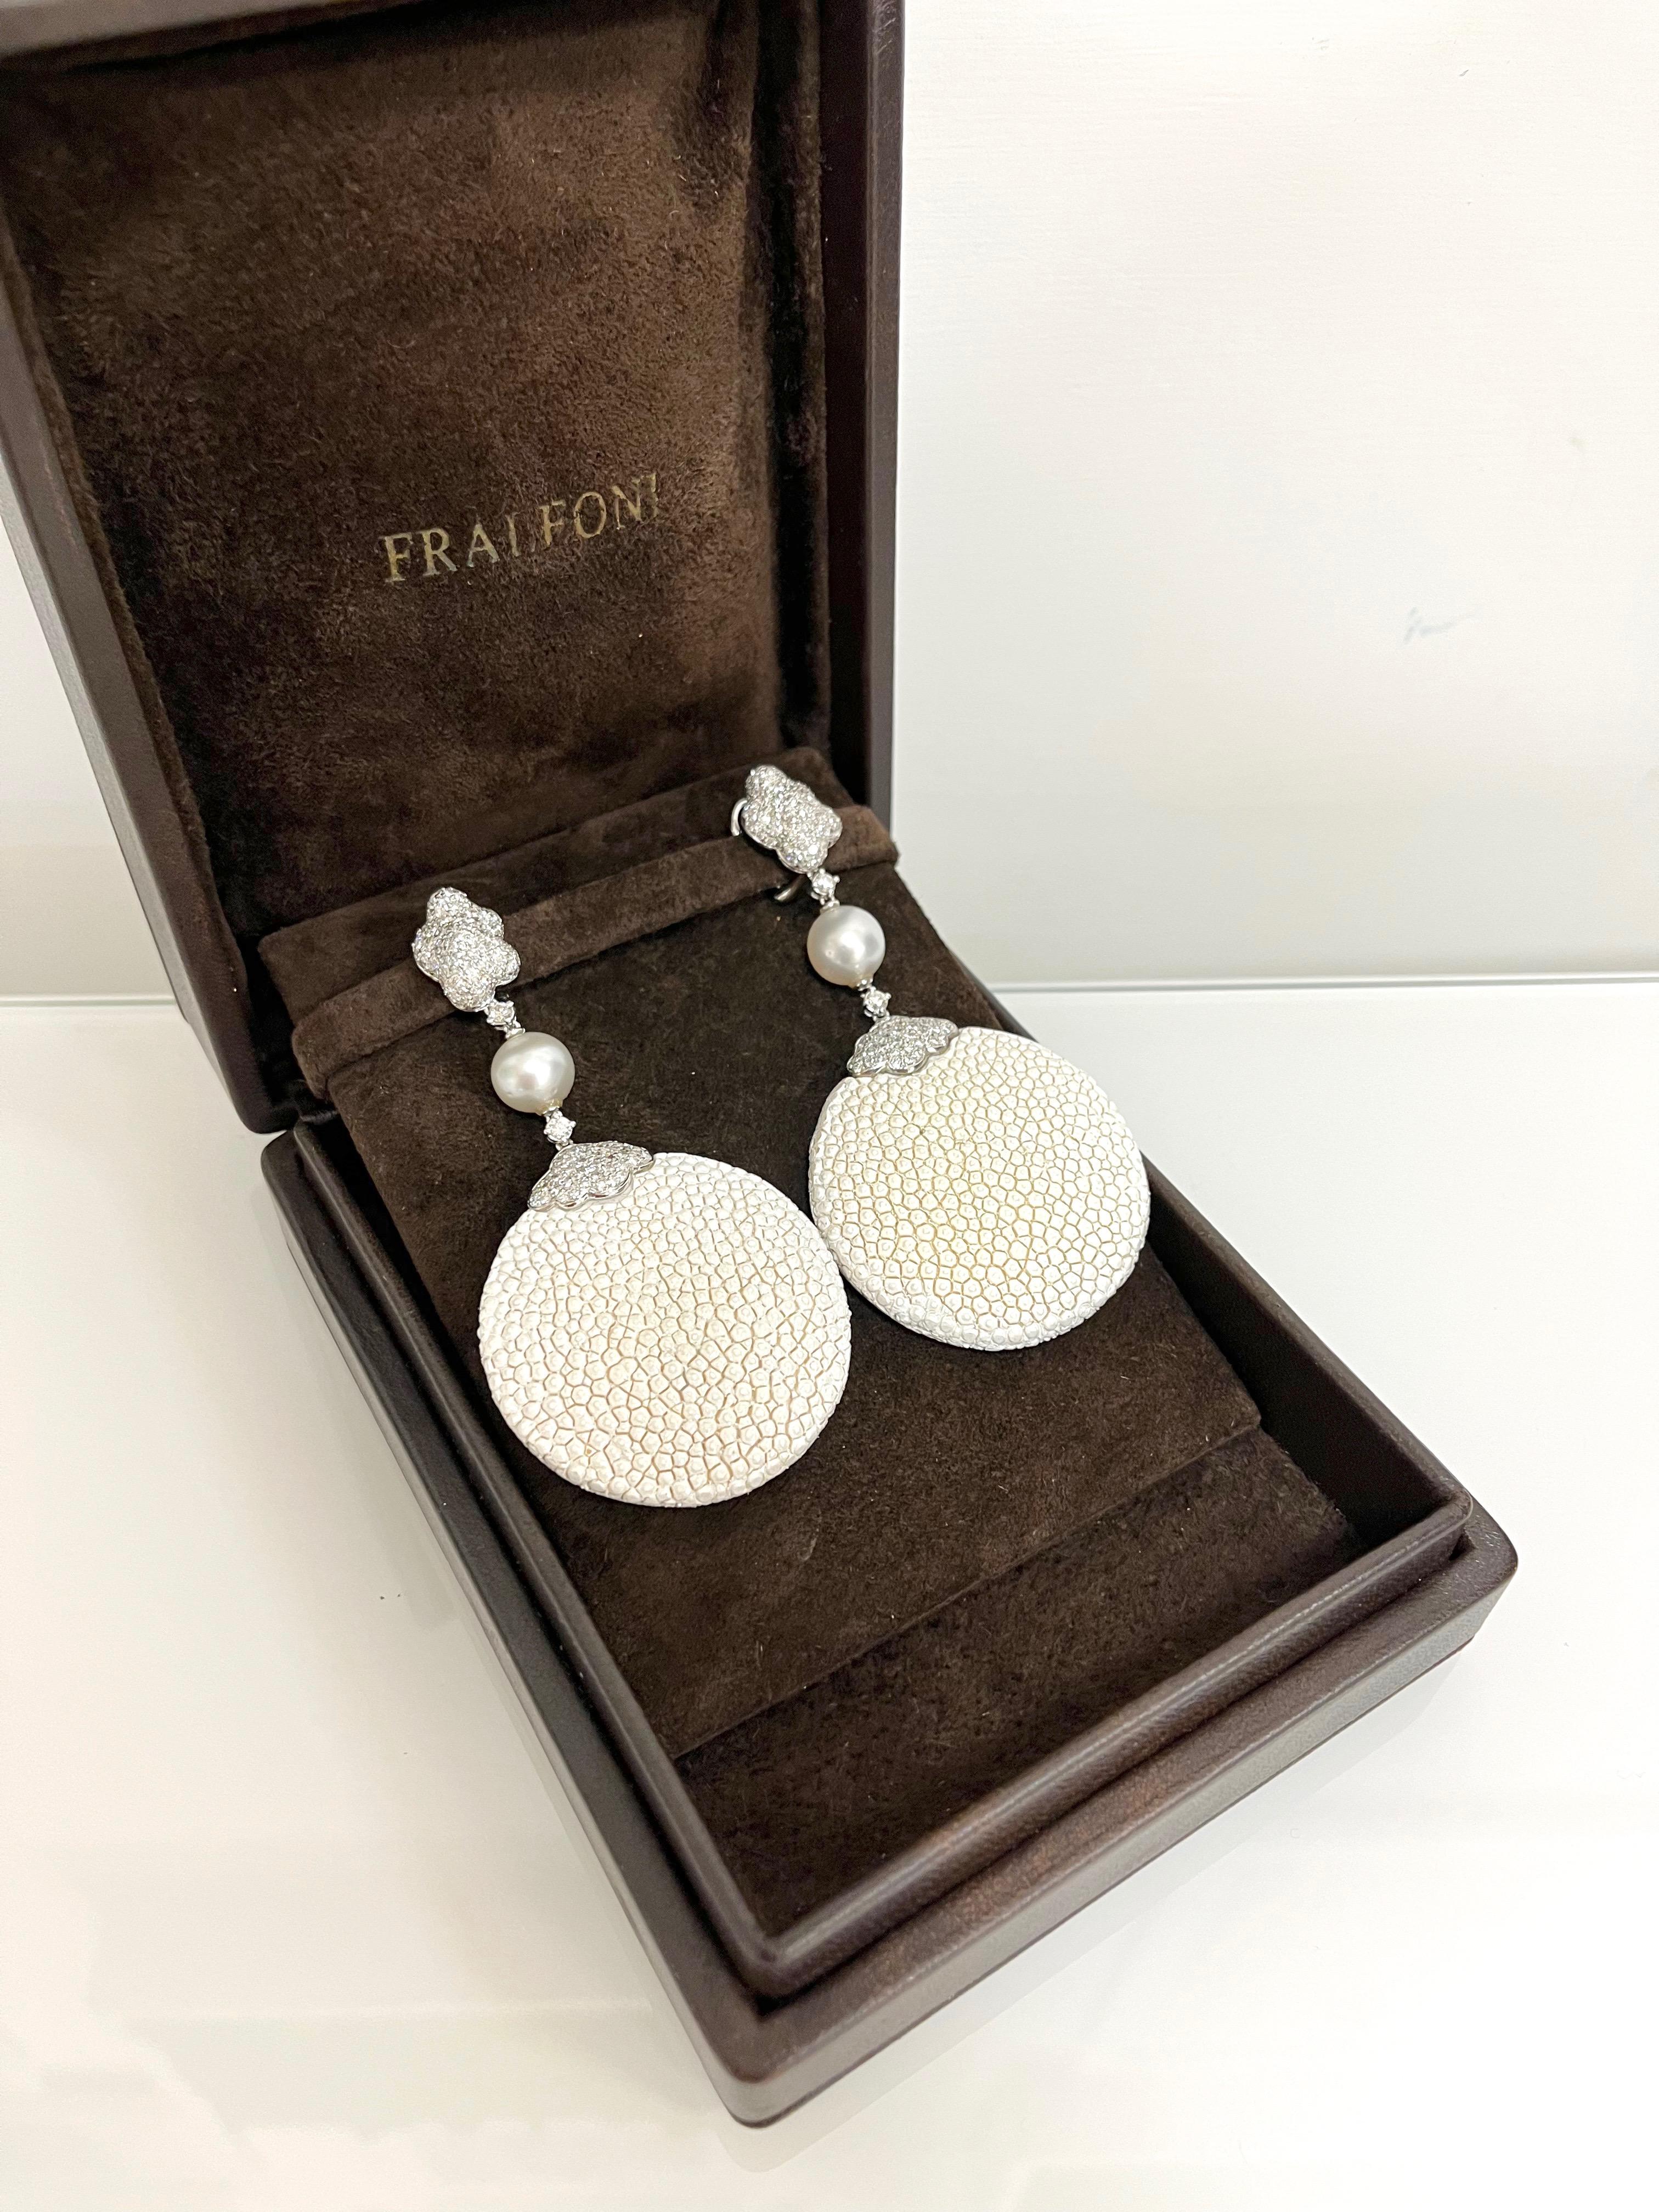 18 kt. white gold chandelier earrings with round-cut diamonds, south sea pearls and stingray.
This amazing pair of earrings are handmade in Italy and is one of a kind piece.
The stingray is natural and hand painted.
Round-cut diamonds: 3.38 ct. (